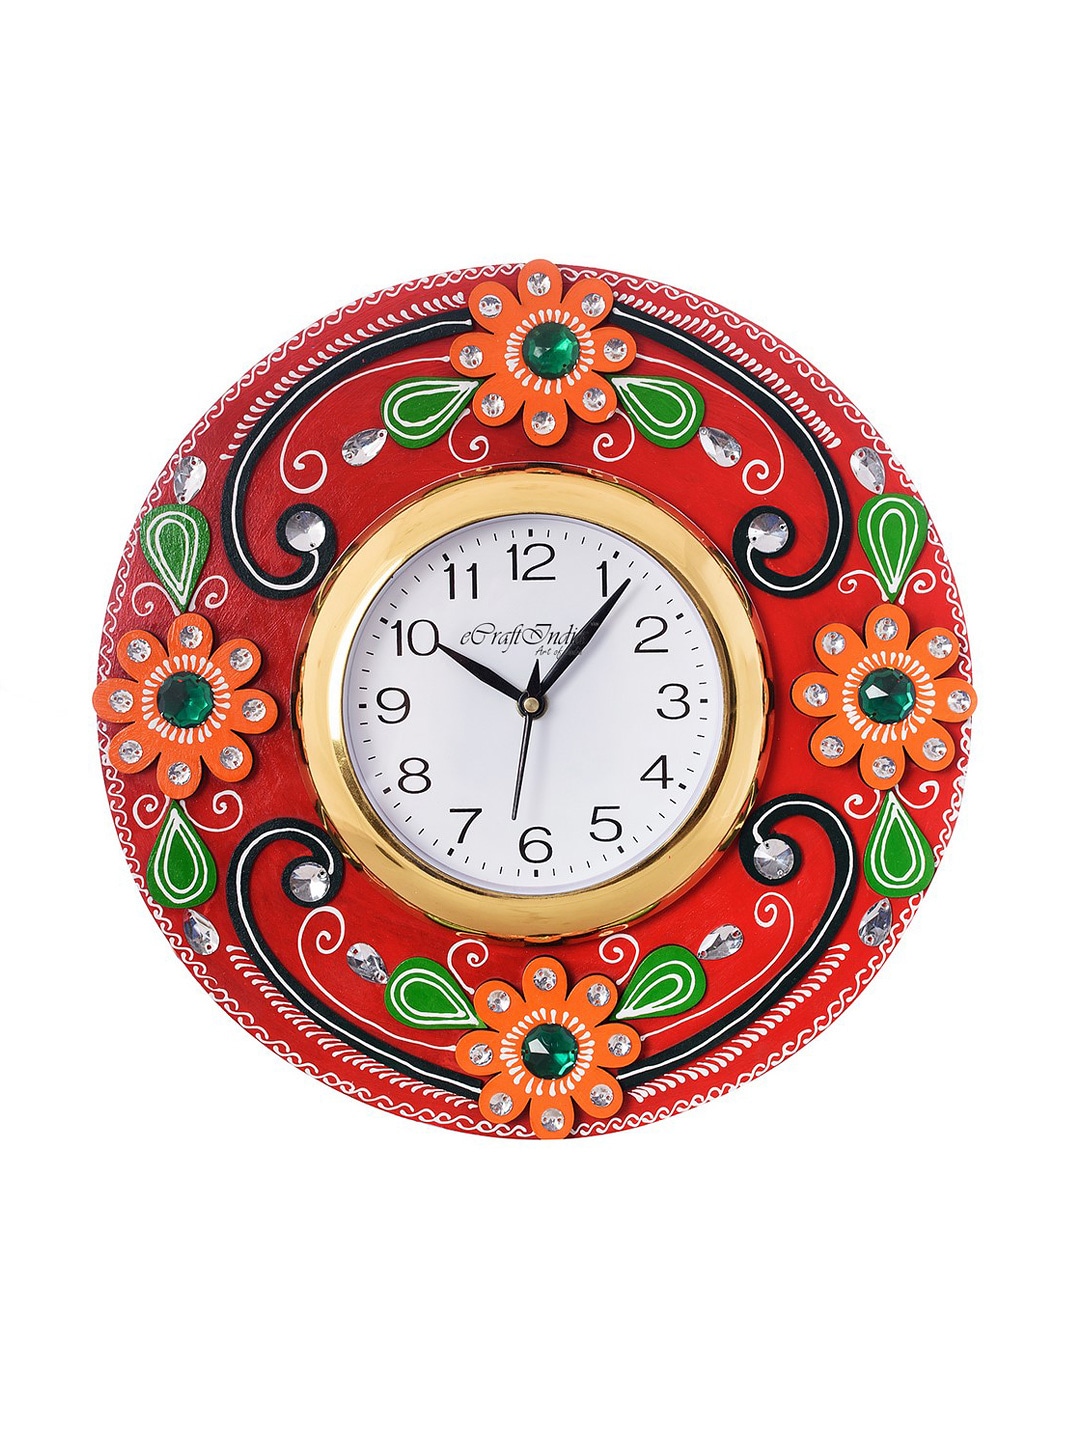 eCraftIndia White Dial Crystal-Studded 30.48 cm Handcrafted Analogue Wall Clock Price in India